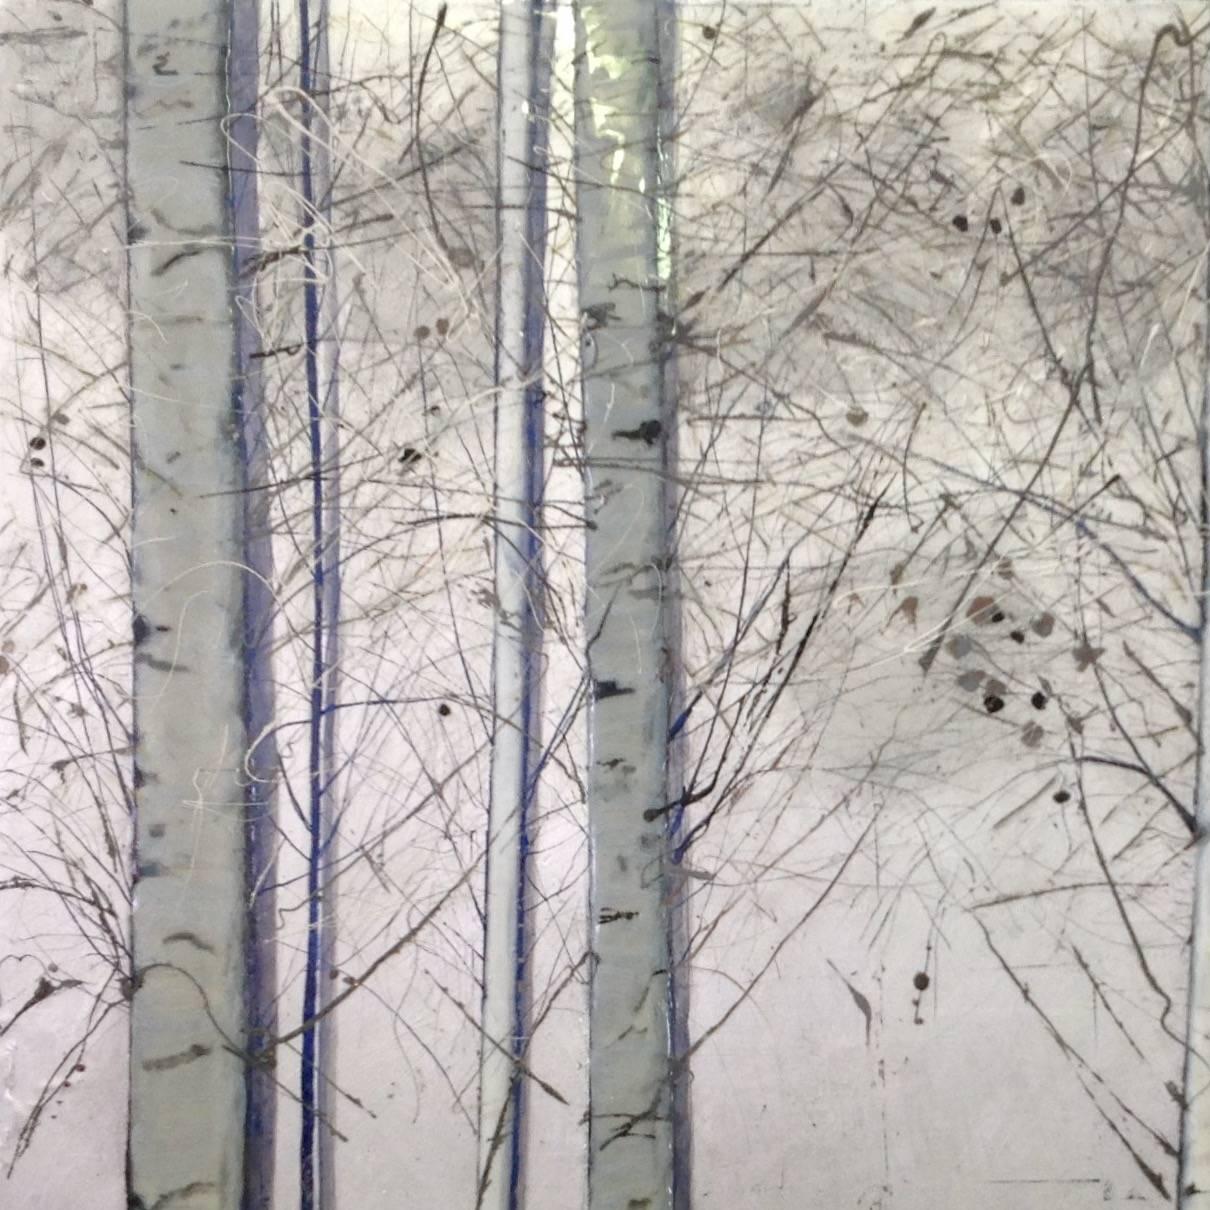 Silver Birches, Original, Oil paint on Canvas, Landscape, Exemplary Art Review - Naturalistic Painting by Lydia Bauman